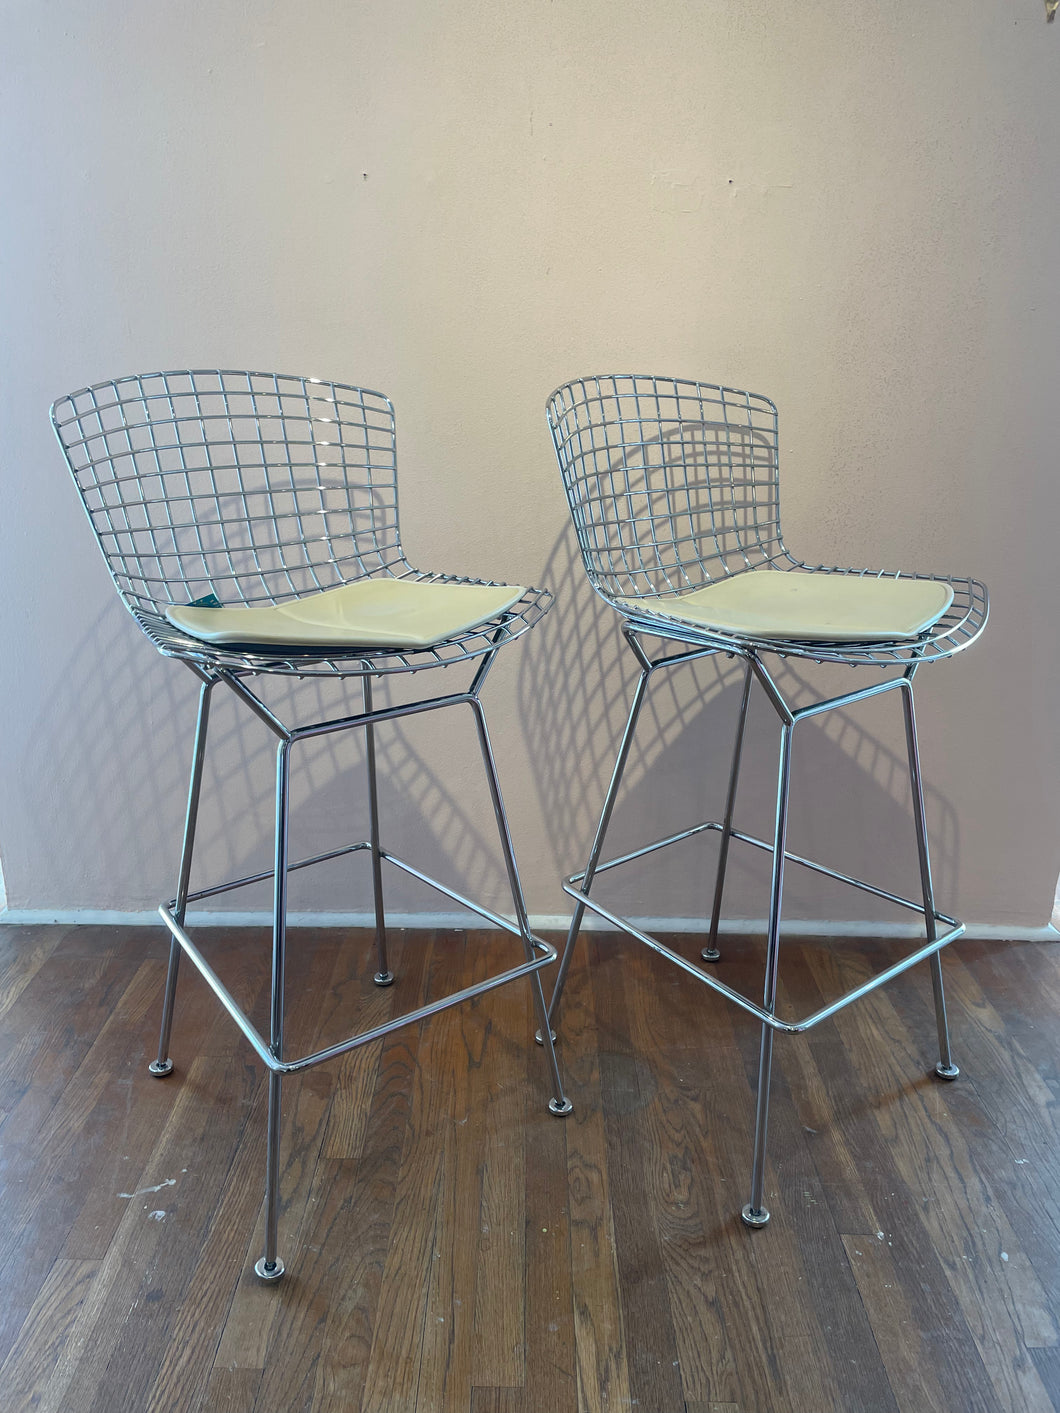 Vintage Authentic Harry Bertoia For Knoll Chrome Barstools w/ Original Leather Seat Pads (2)